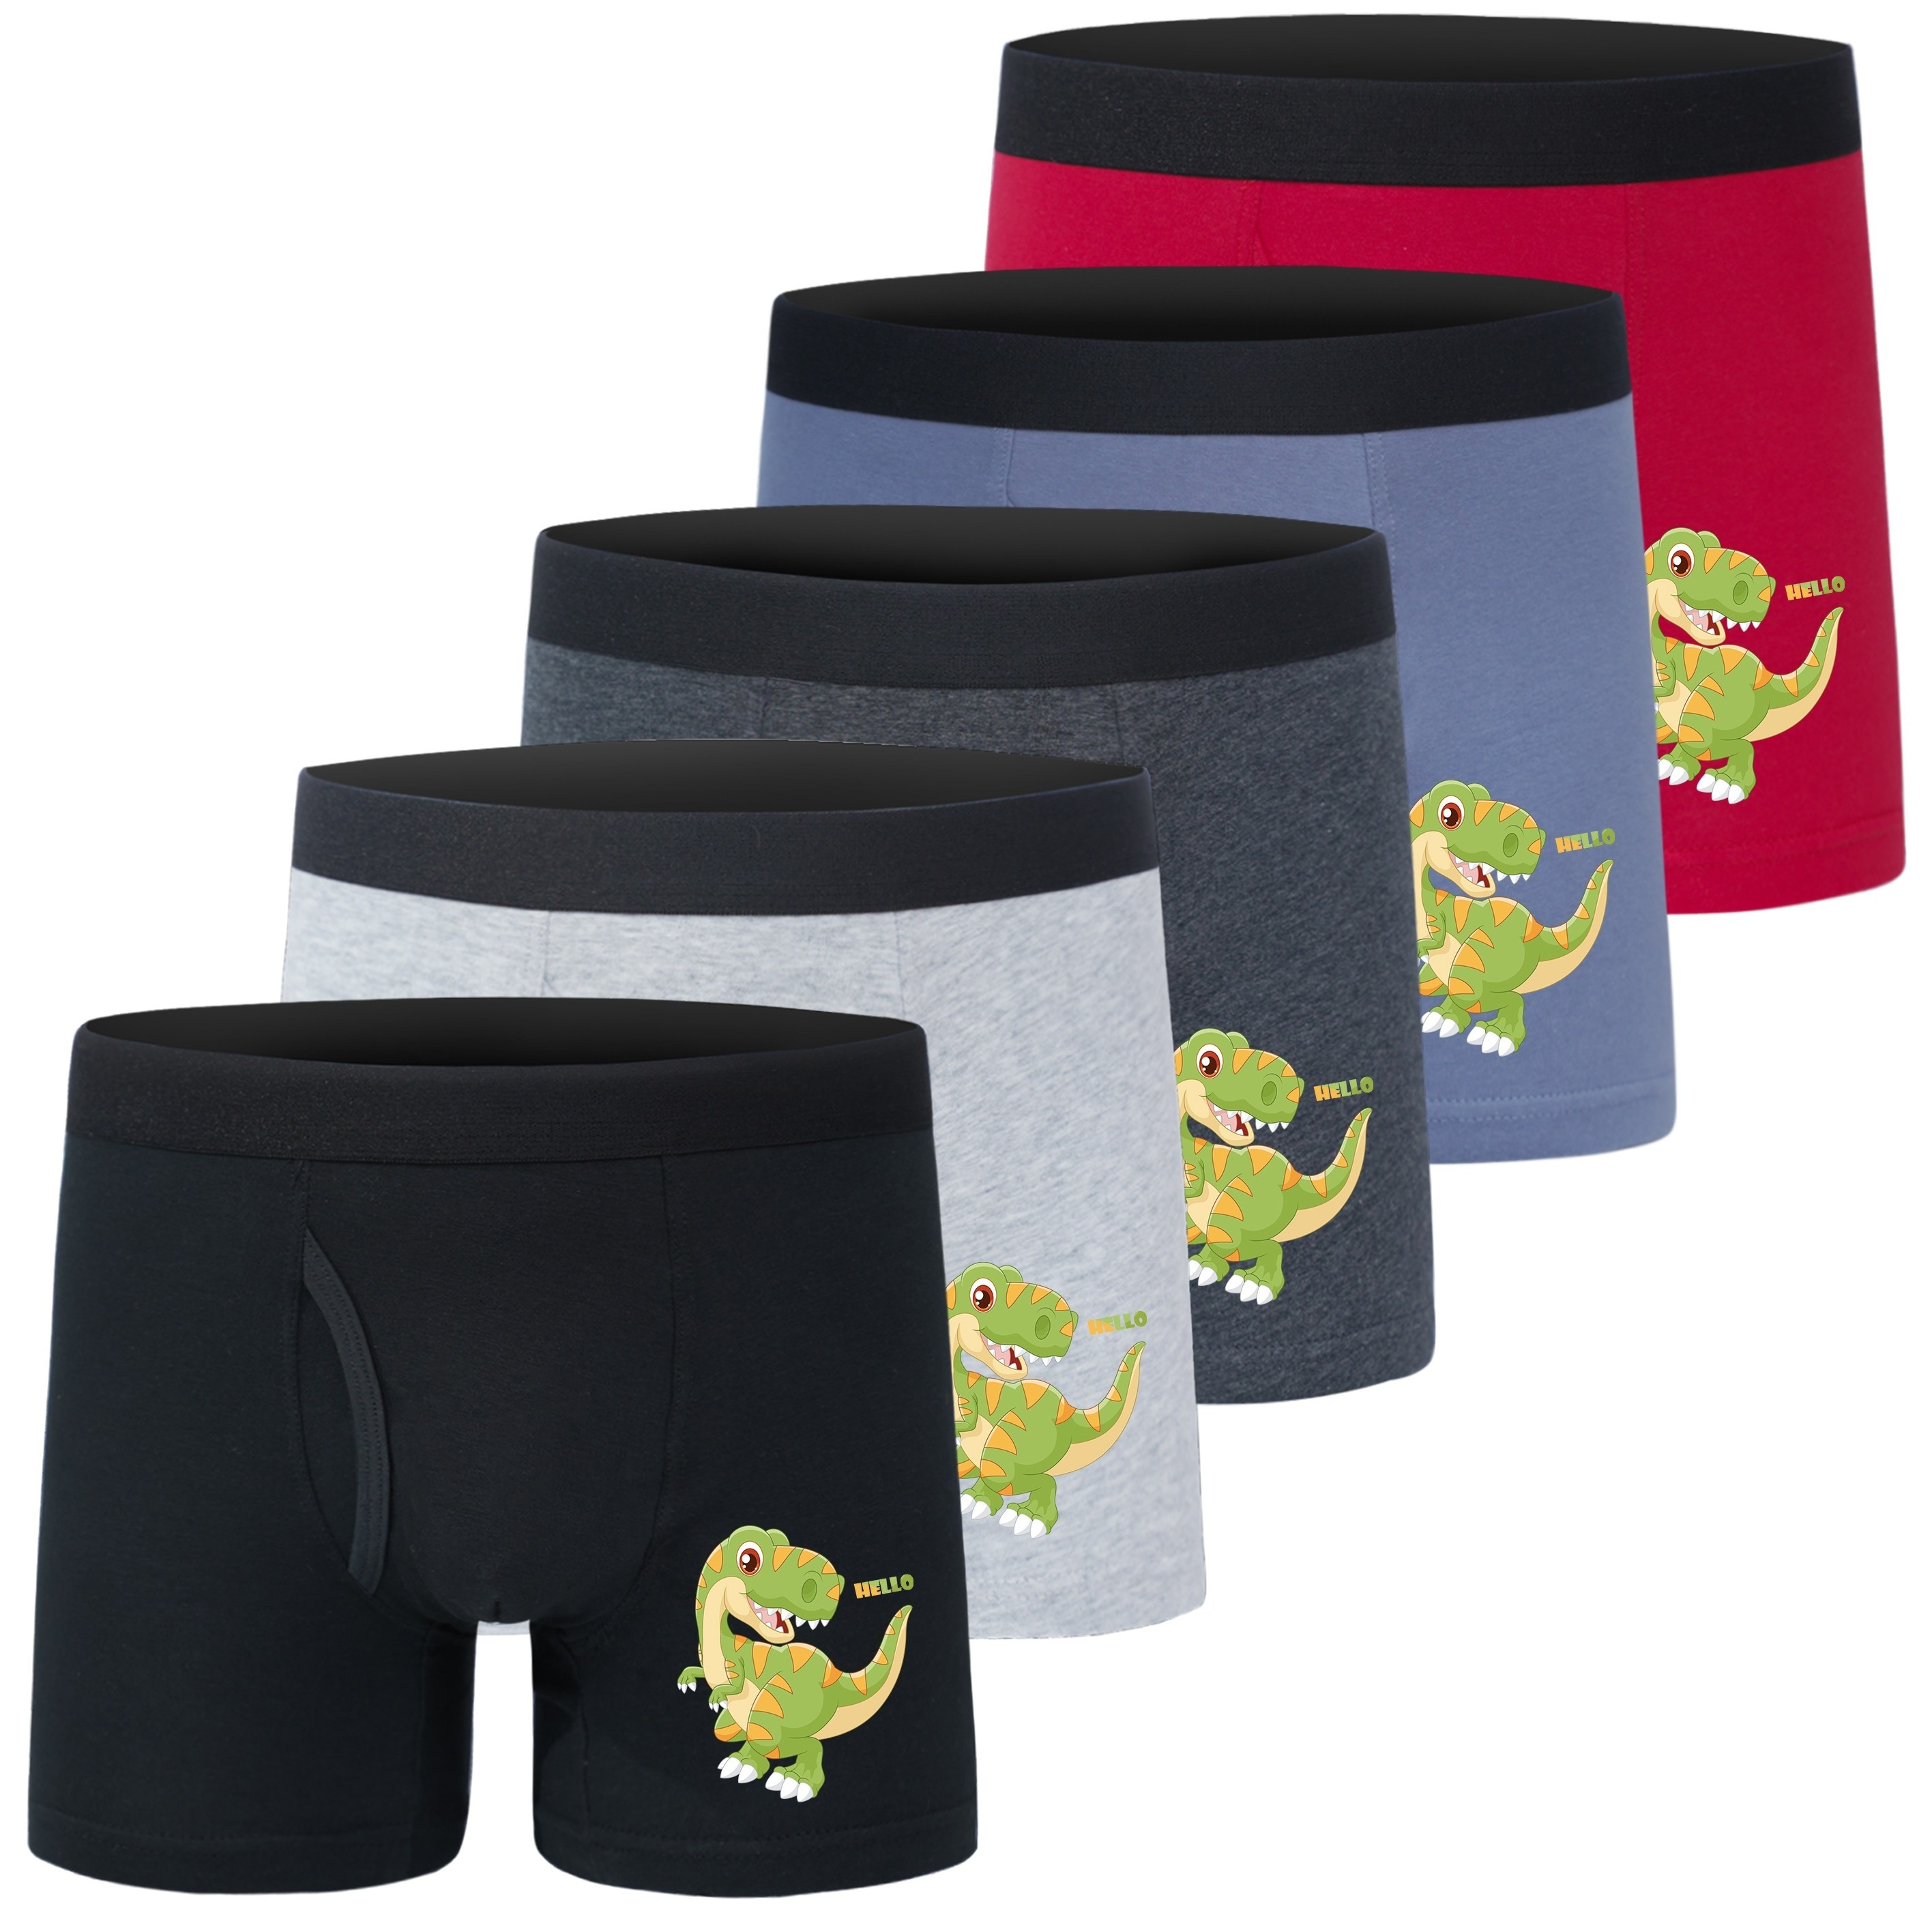 

Boys' Cotton Boxer Briefs 5-pack With Dinosaur Print - Soft Stretch Sports Underwear, Comfortable Knit Fabric, Flexible Fit For Kids, All-season - Ages 12 & Under